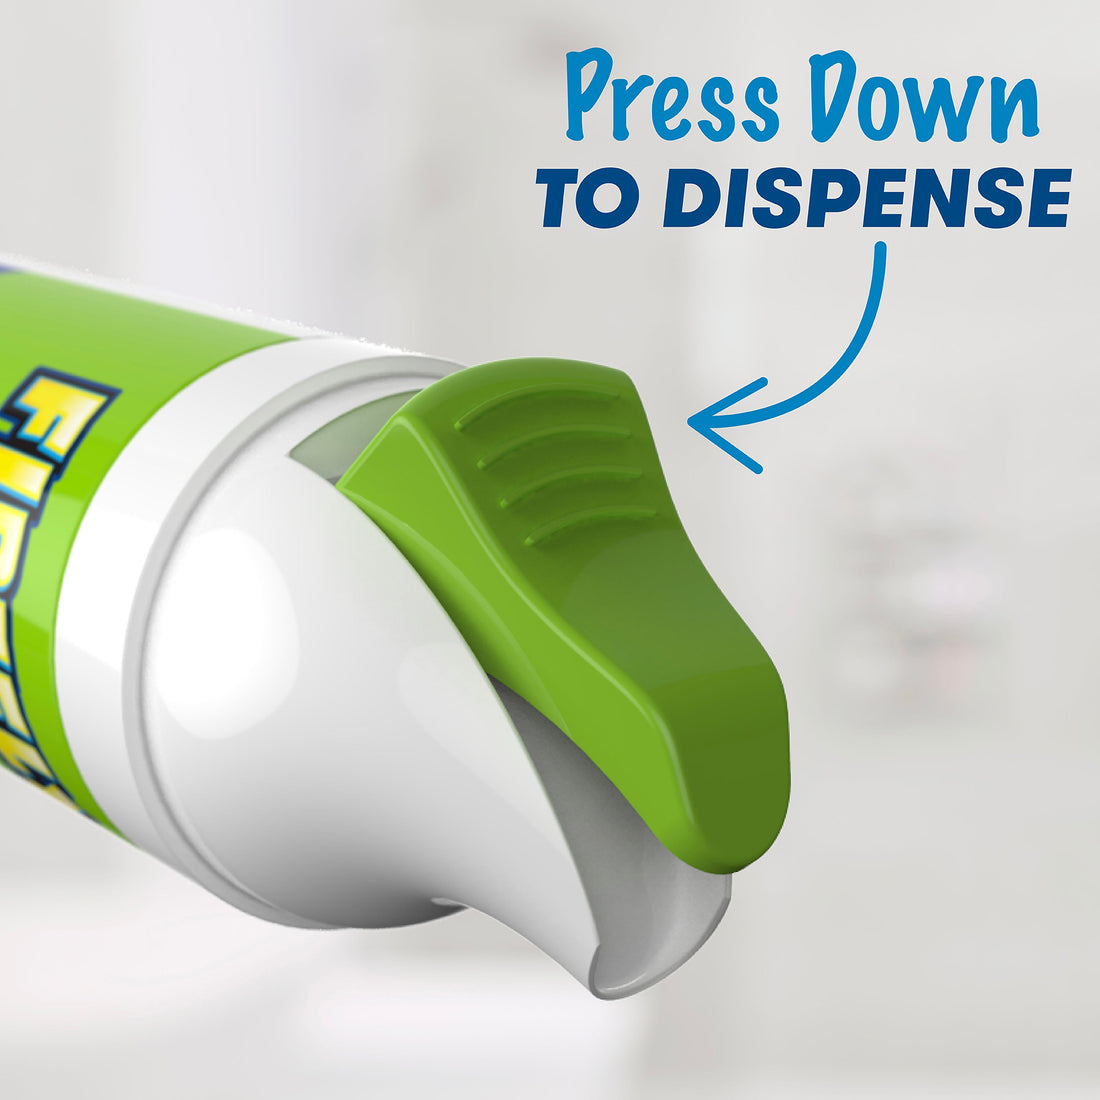 Close up of Firefly toothpaste, press down to dispense 